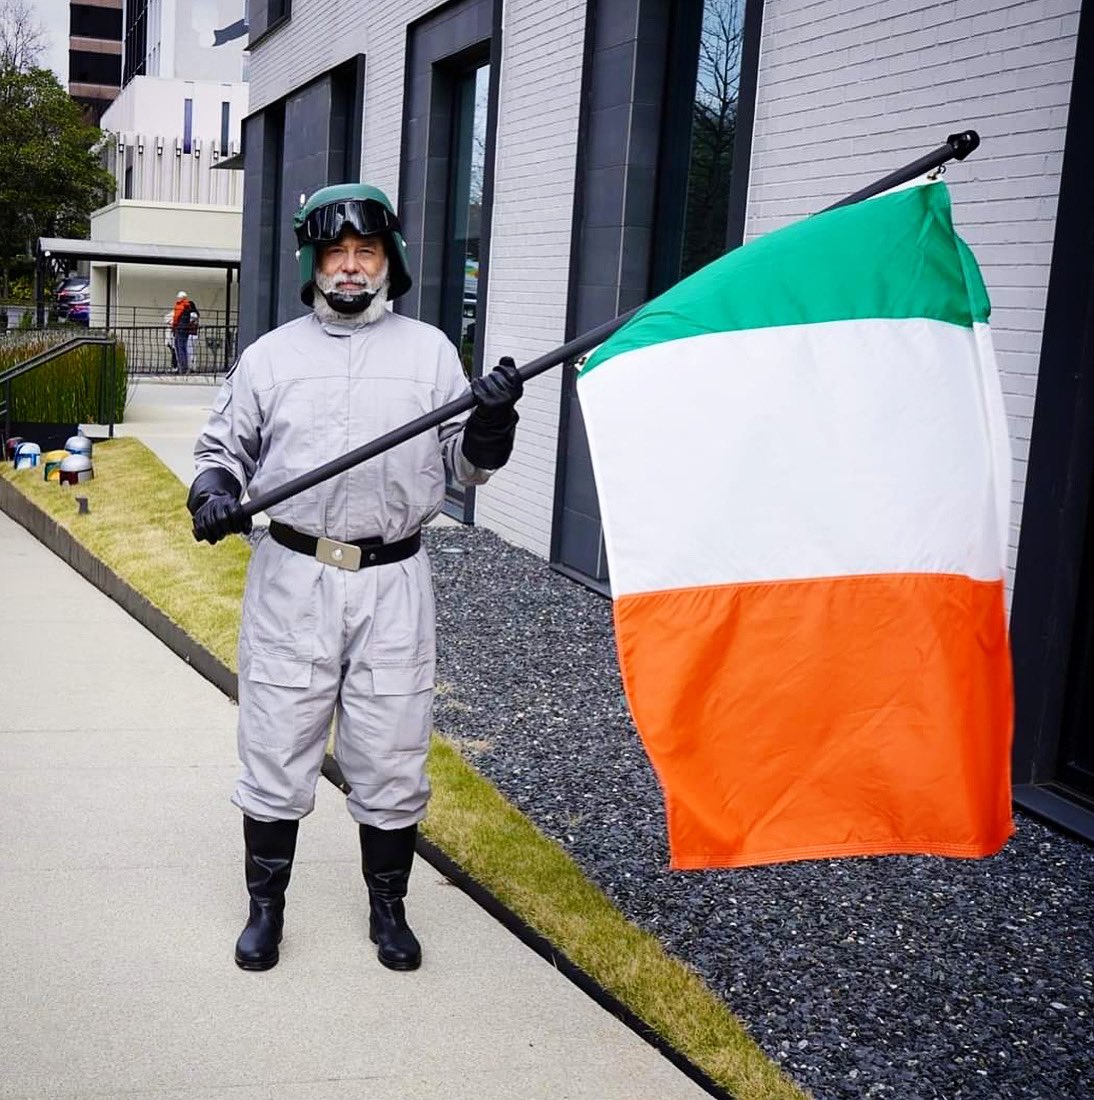 IS-31400 celebrating his Irish heritage during Atlanta’s annual Saint Patrick’s Parade! 🇮🇪 “My biological mother was Irish. Her name was Josephine Fraley. Her grandfather came to KY from Ireland to work in the coal mines in the 1800s. He was from County Cork.” #StPatricksDay